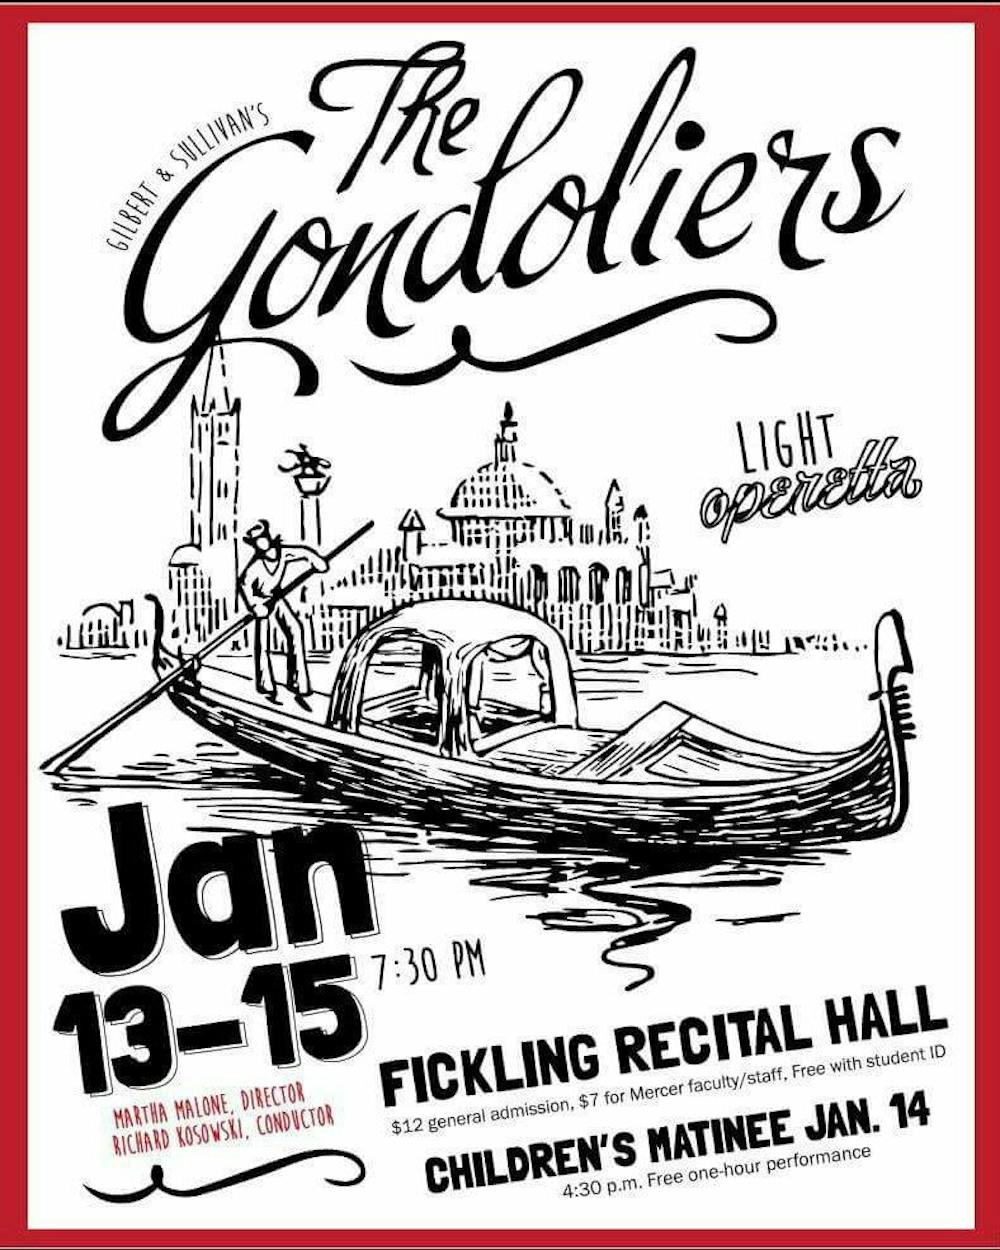 Mercer University Opera has successful run of The Gondoliers at Townsend School of Music.